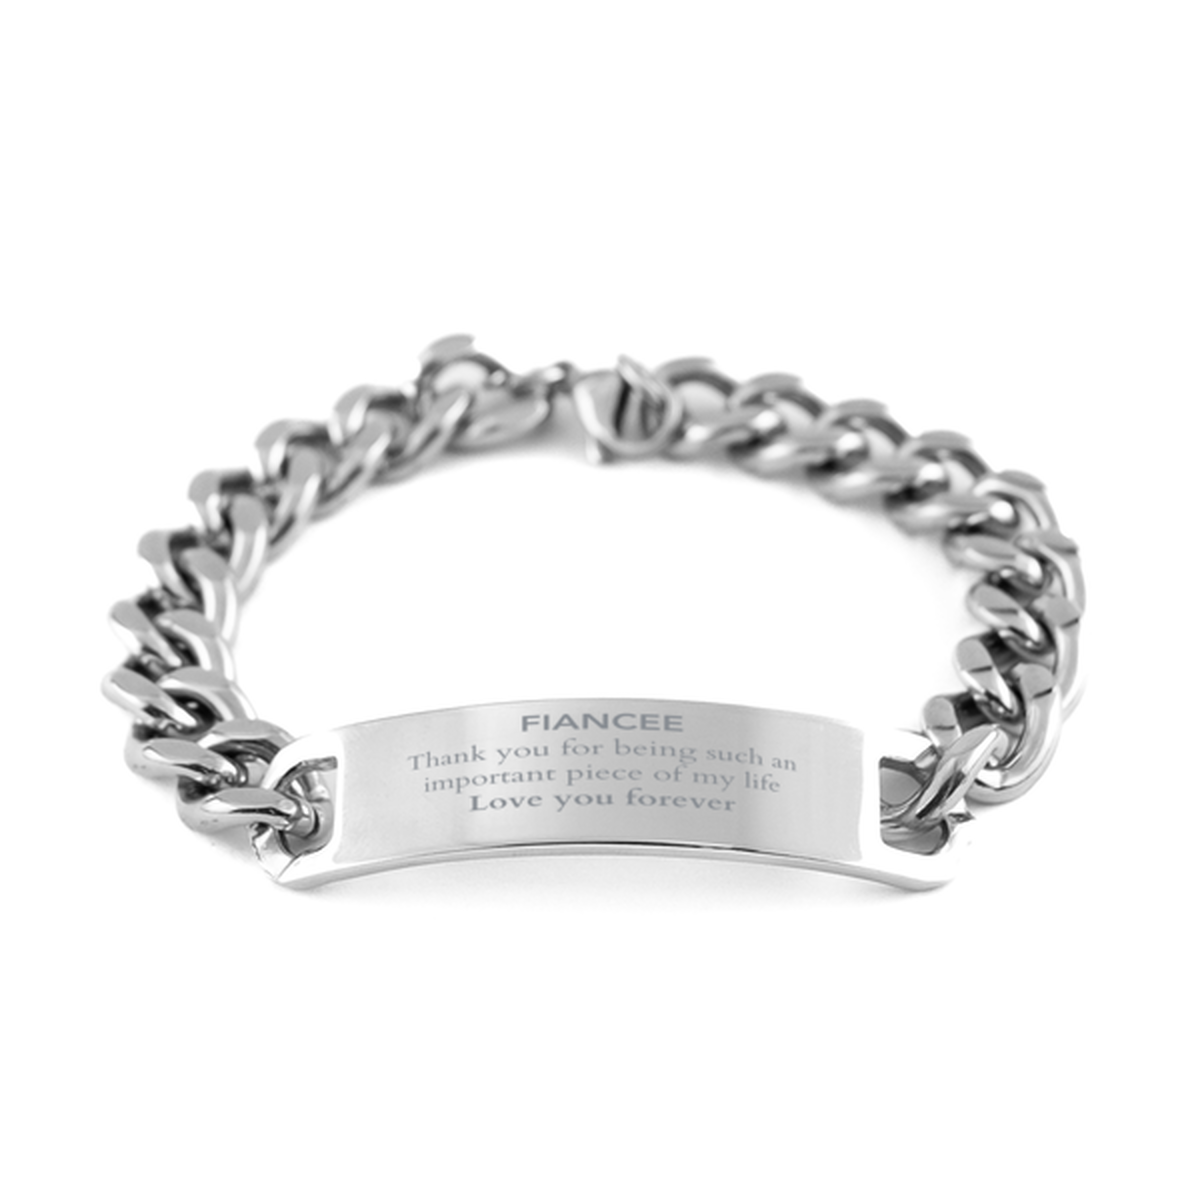 Appropriate Fiancee Cuban Chain Stainless Steel Bracelet Epic Birthday Gifts for Fiancee Thank you for being such an important piece of my life Fiancee Christmas Mothers Fathers Day